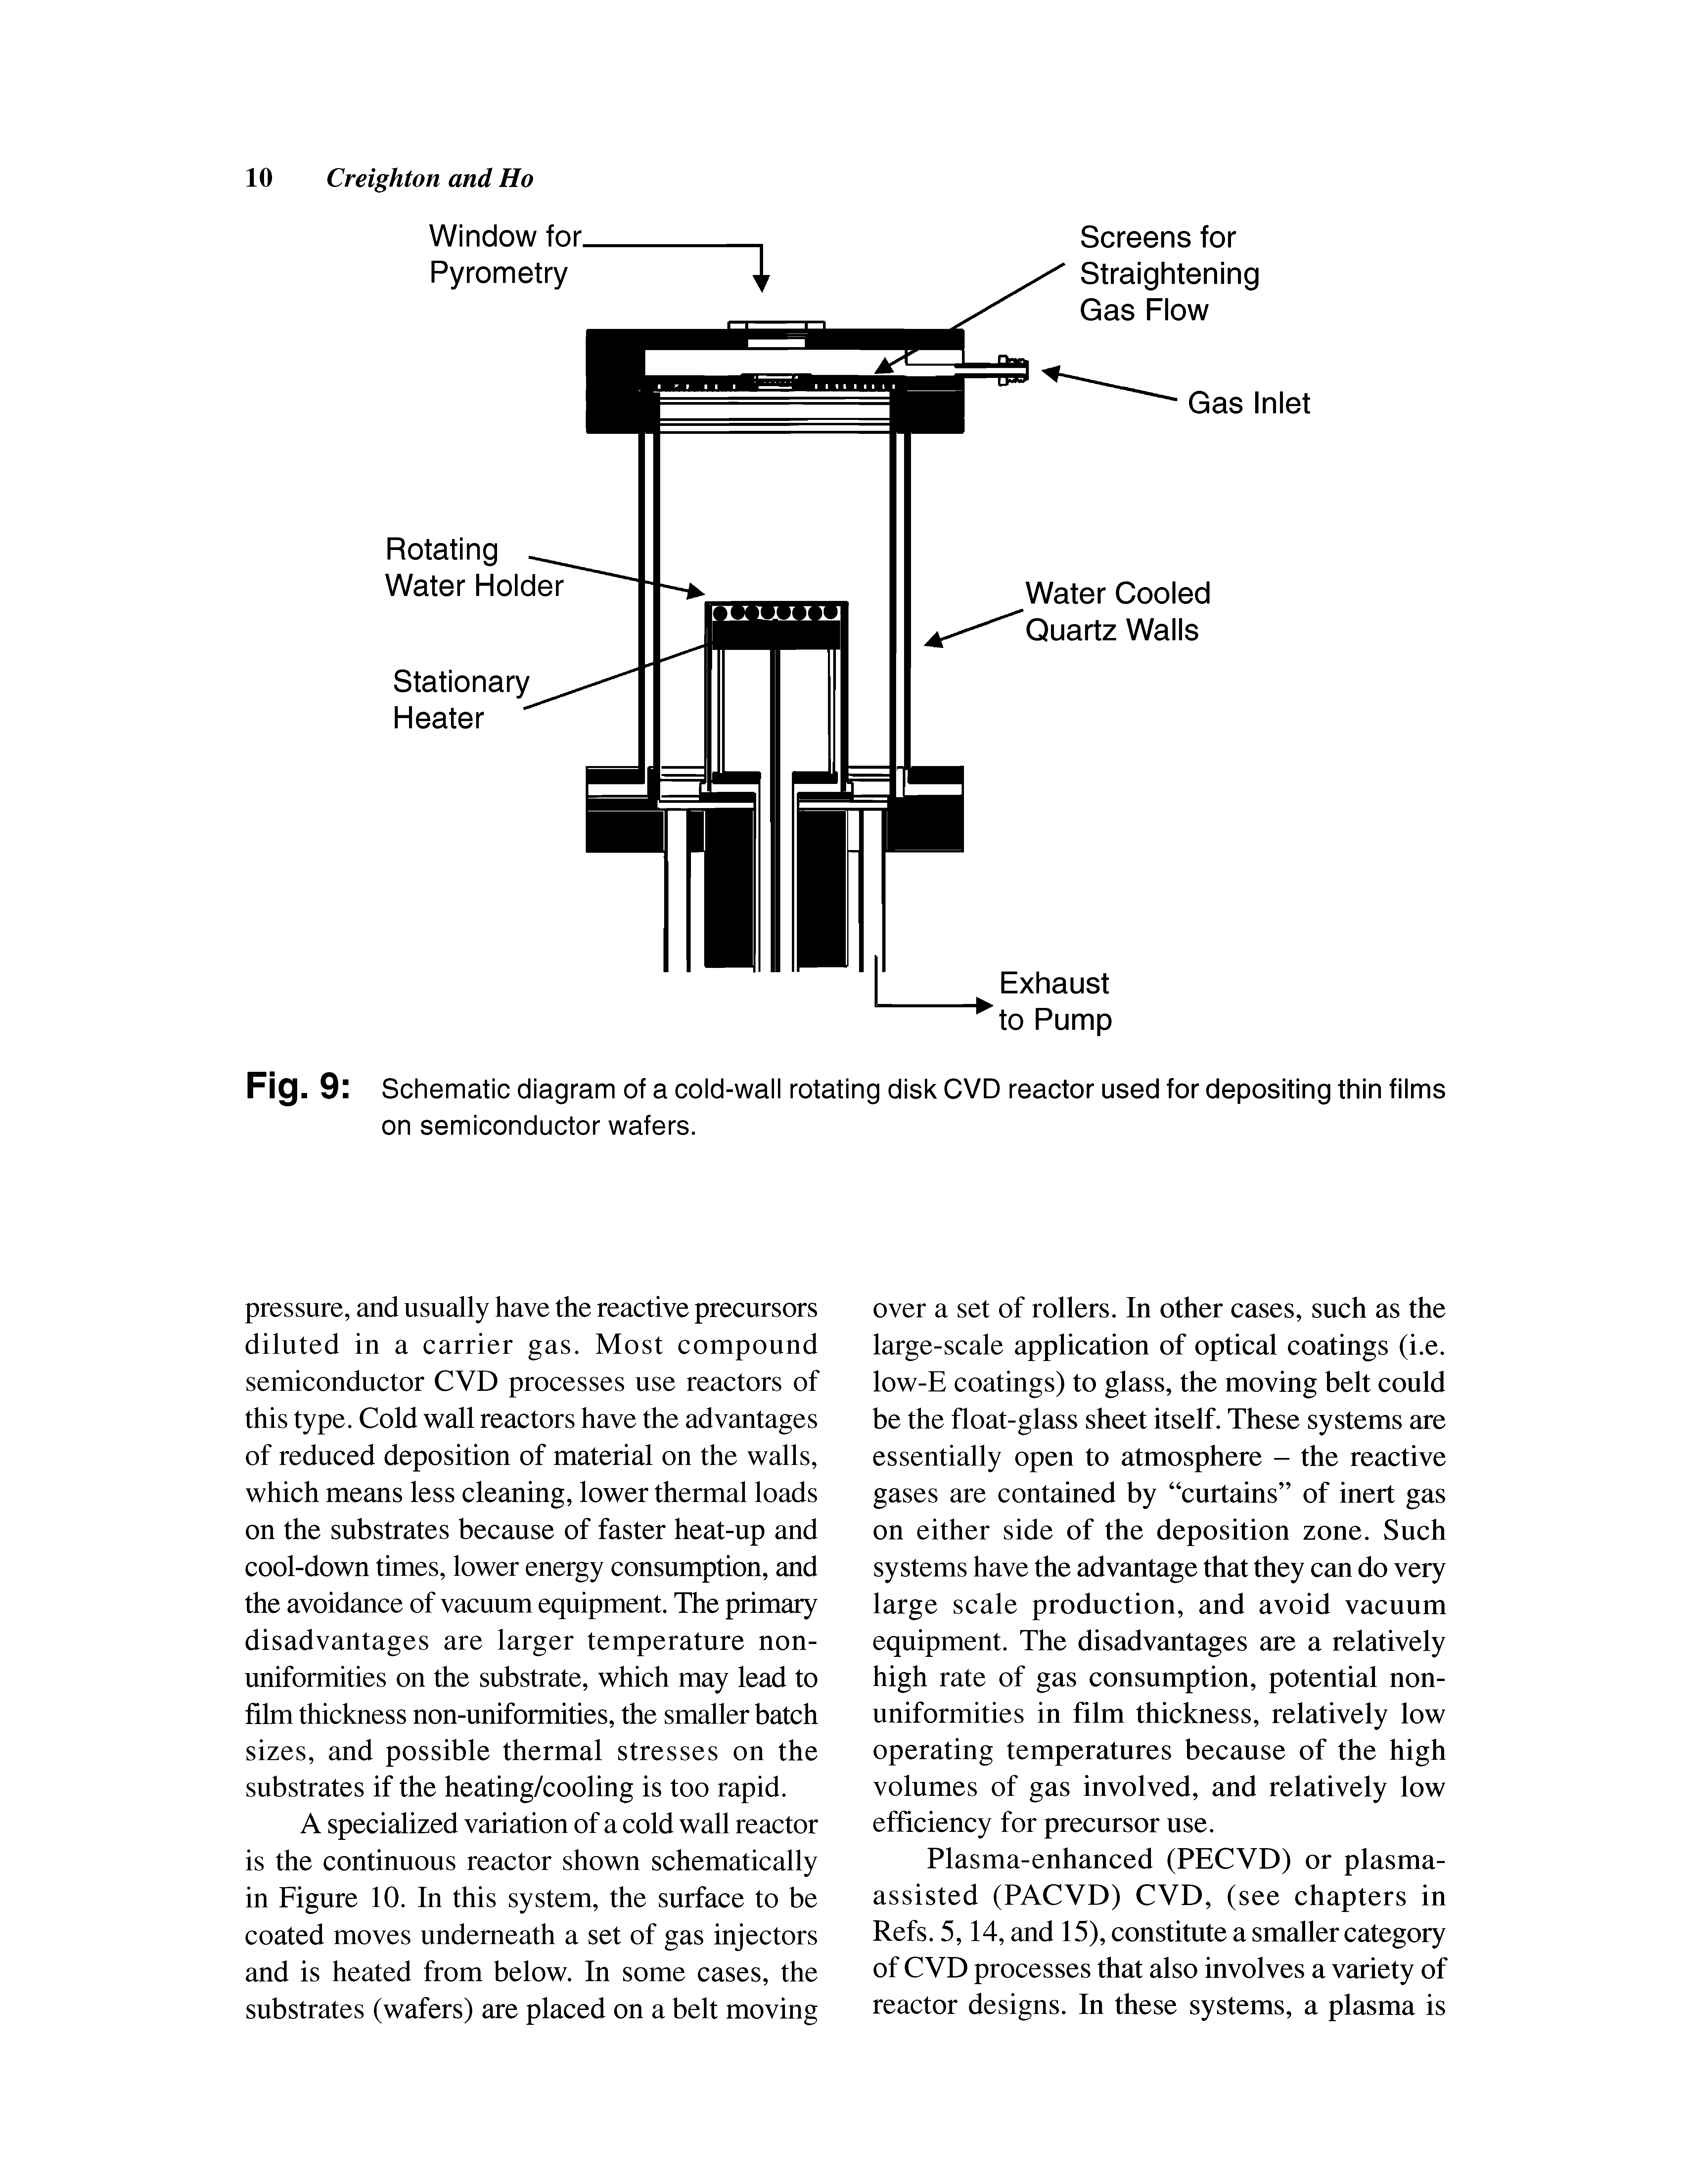 Fig. 9 Schematic diagram of a cold-wall rotating disk CVD reactor used for depositing thin films on semiconductor wafers.